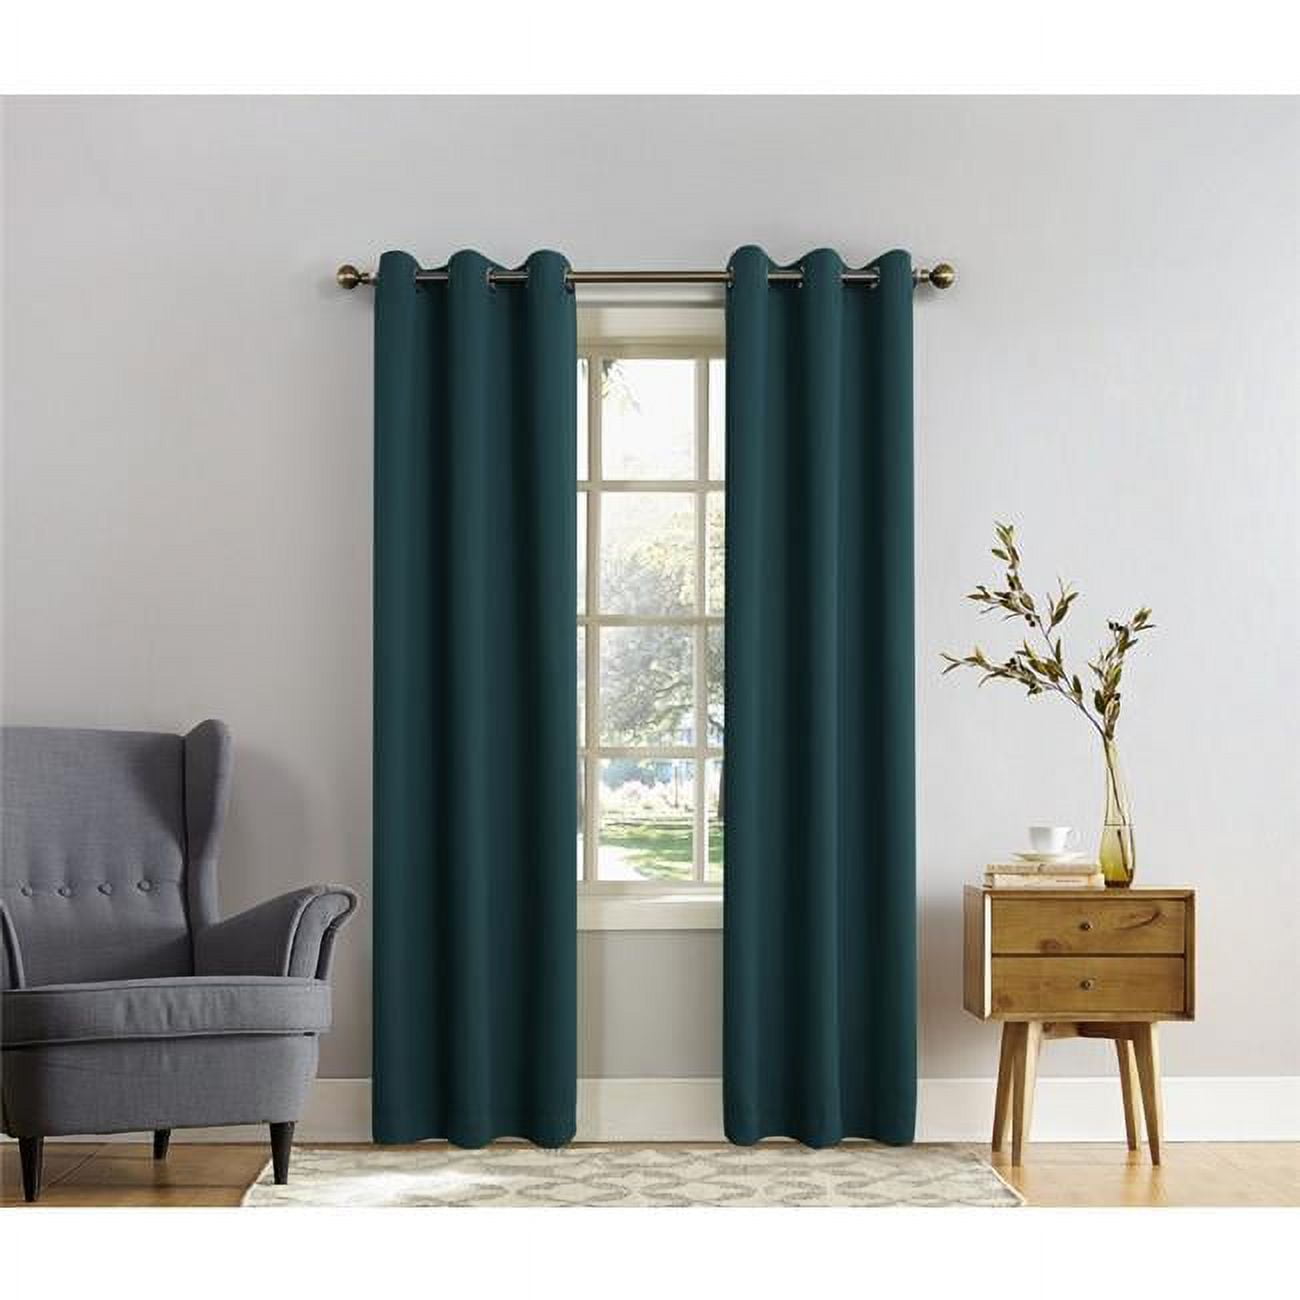 Sun Zero 80 x 84 in. Norwich Green Blackout Curtains - Pack of 2